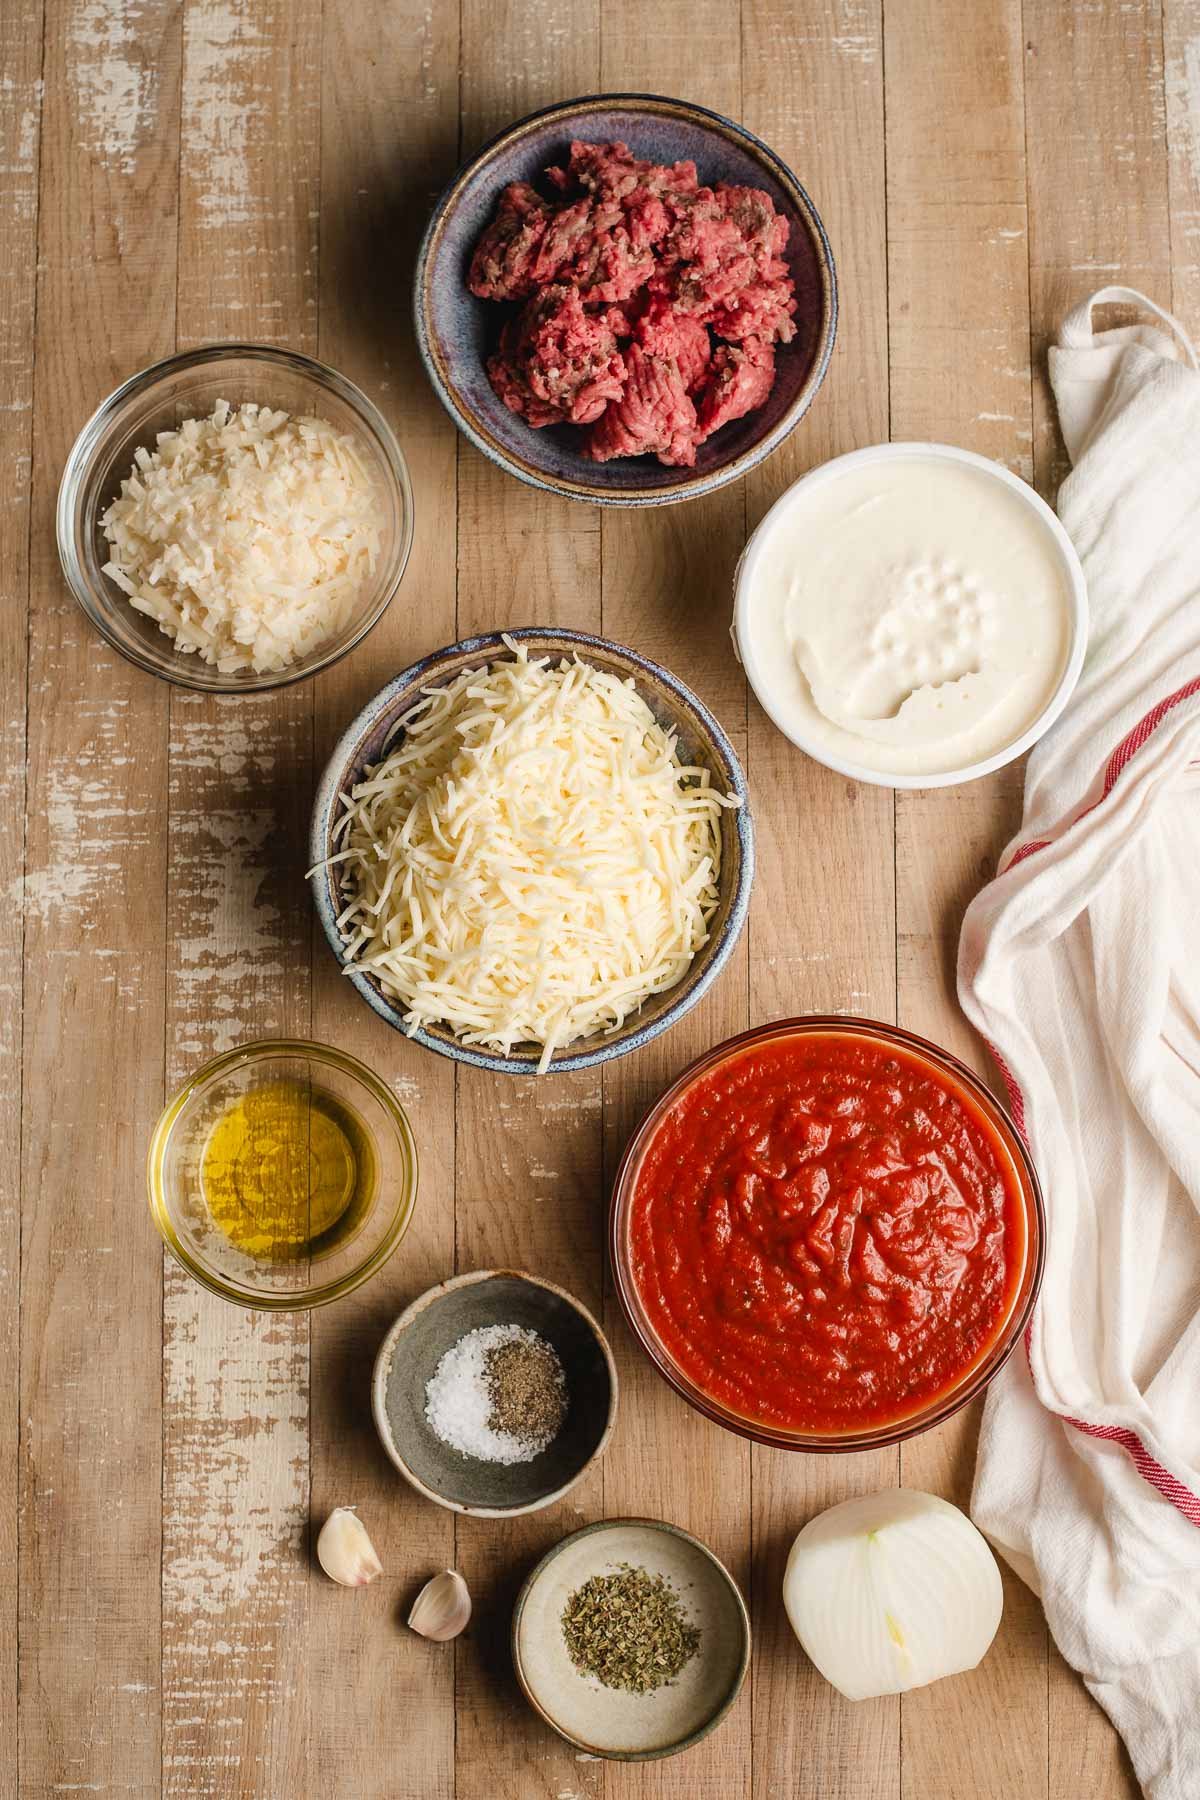 Ingredients for a lasagna dip in small bowls on a wood background.